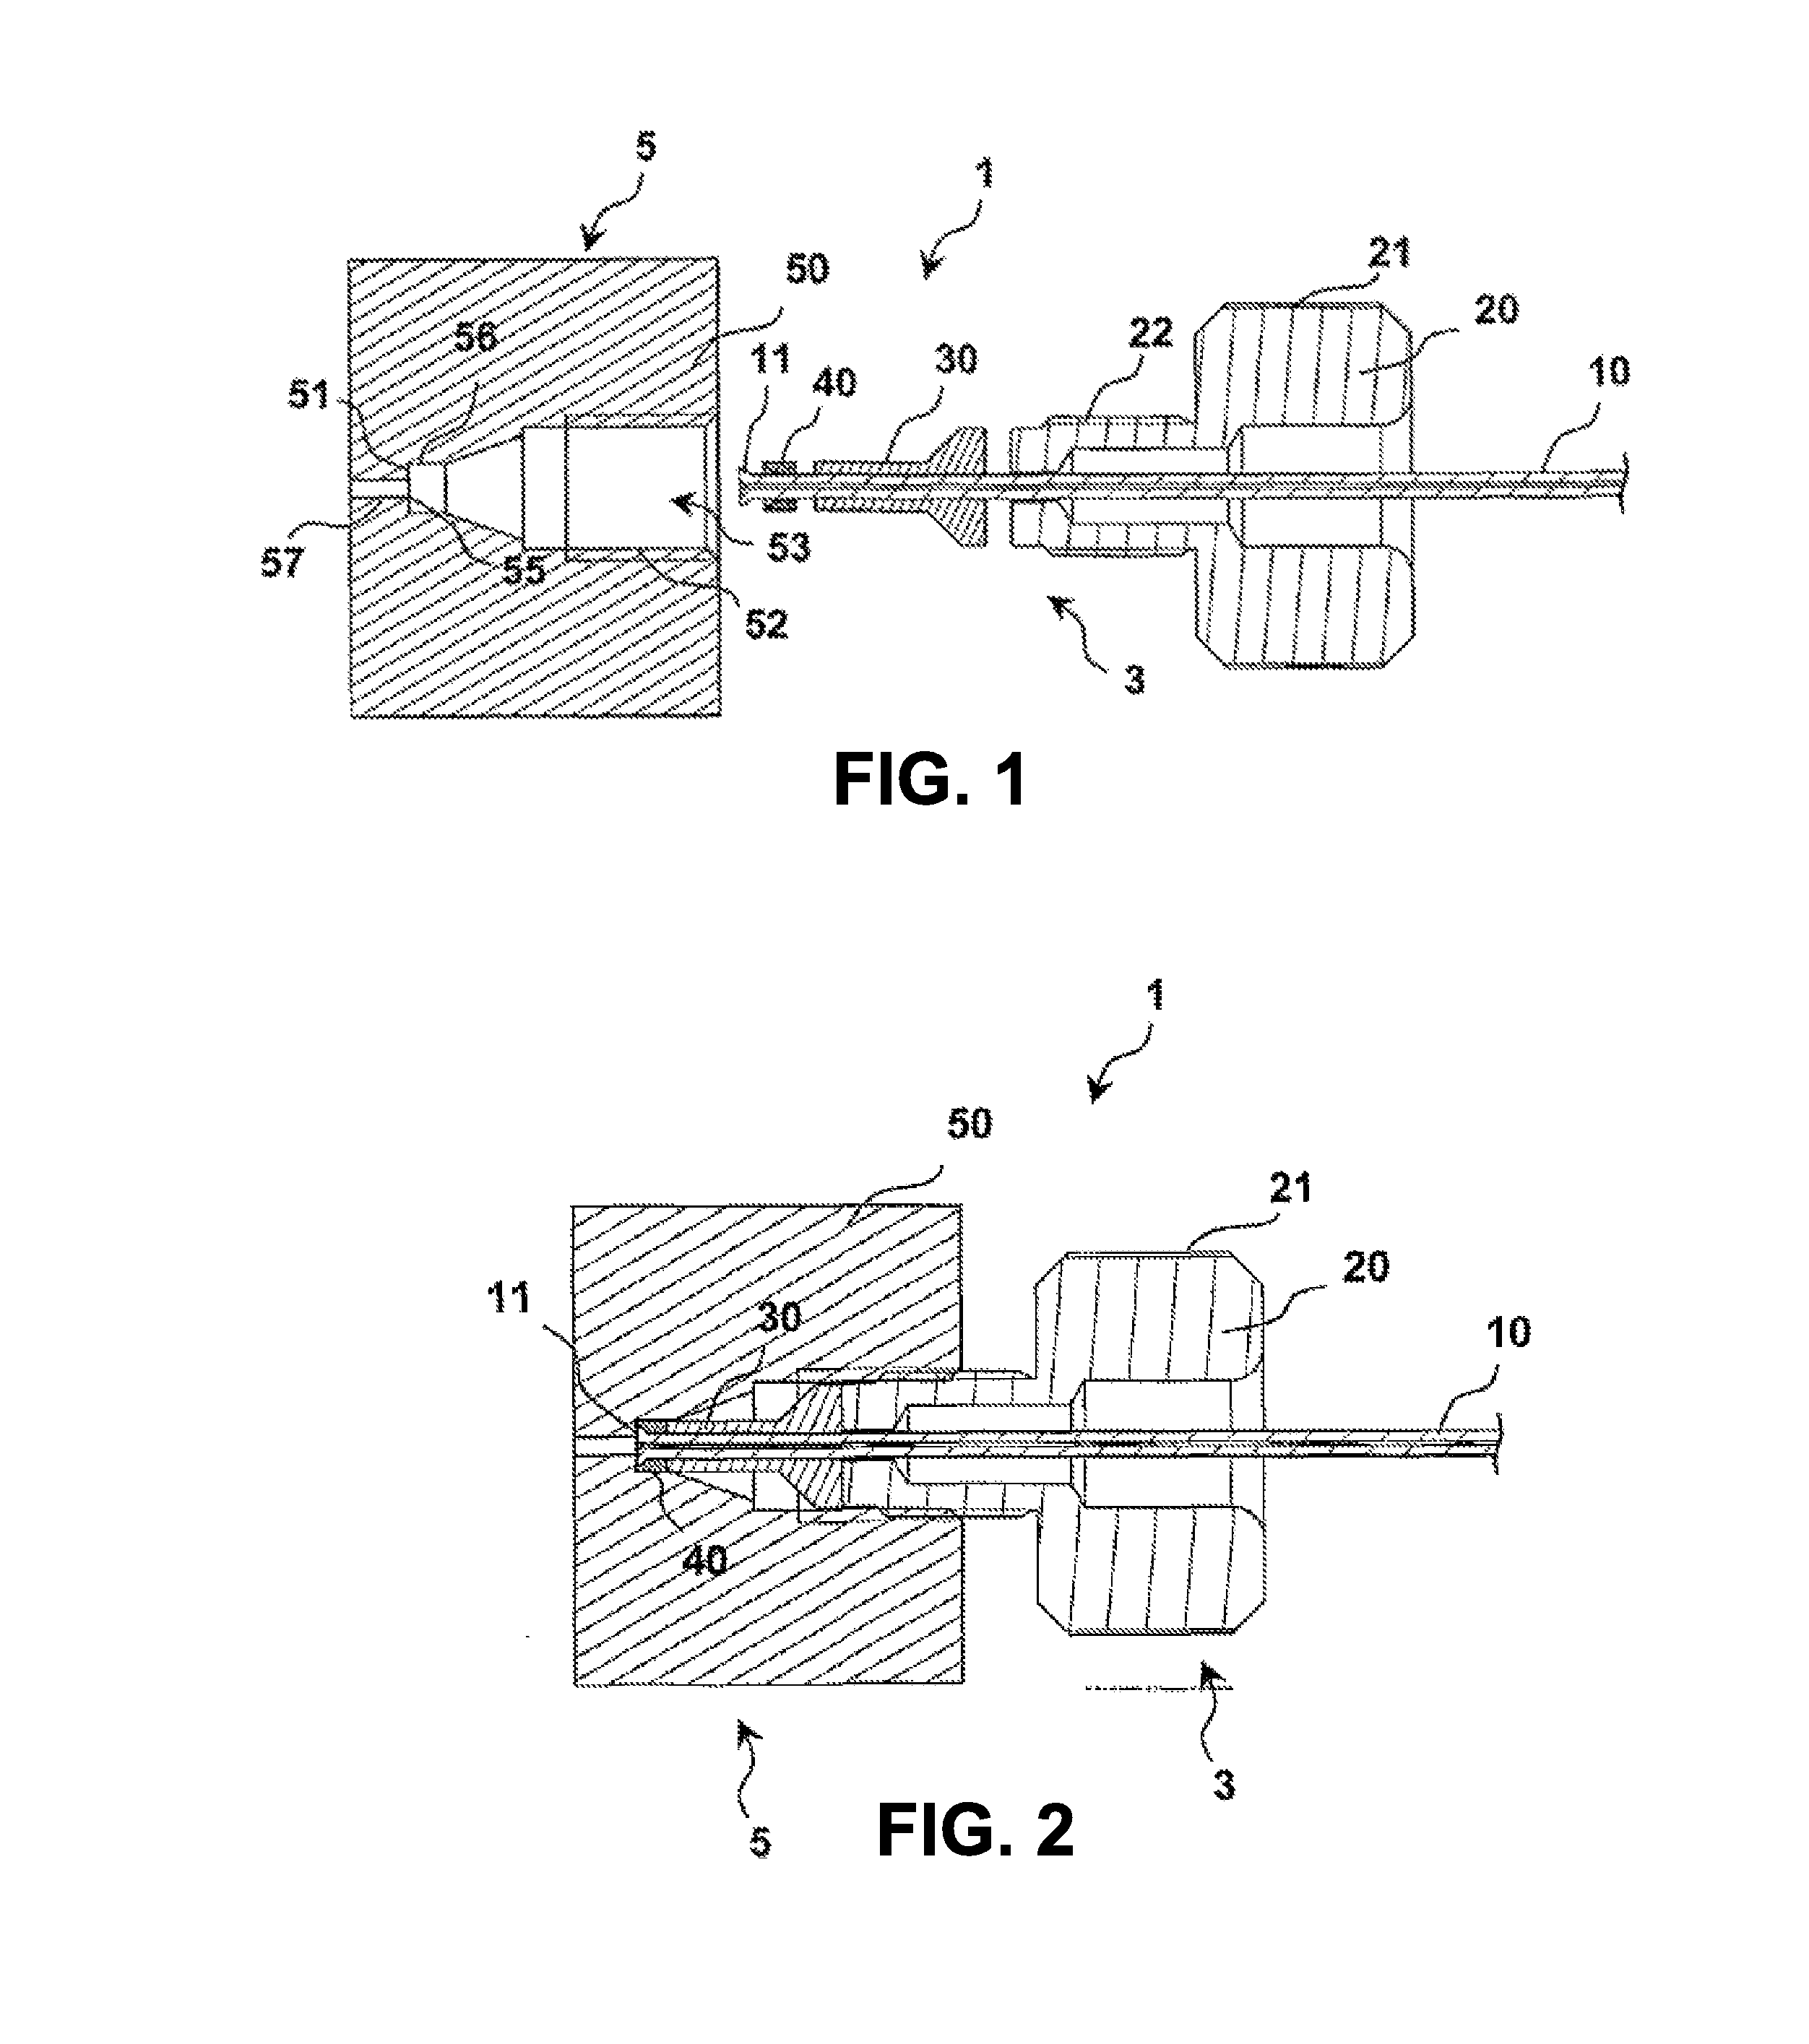 Plug unit and connection system for connecting capillary tubes, especially for high-performance liquid chromatography